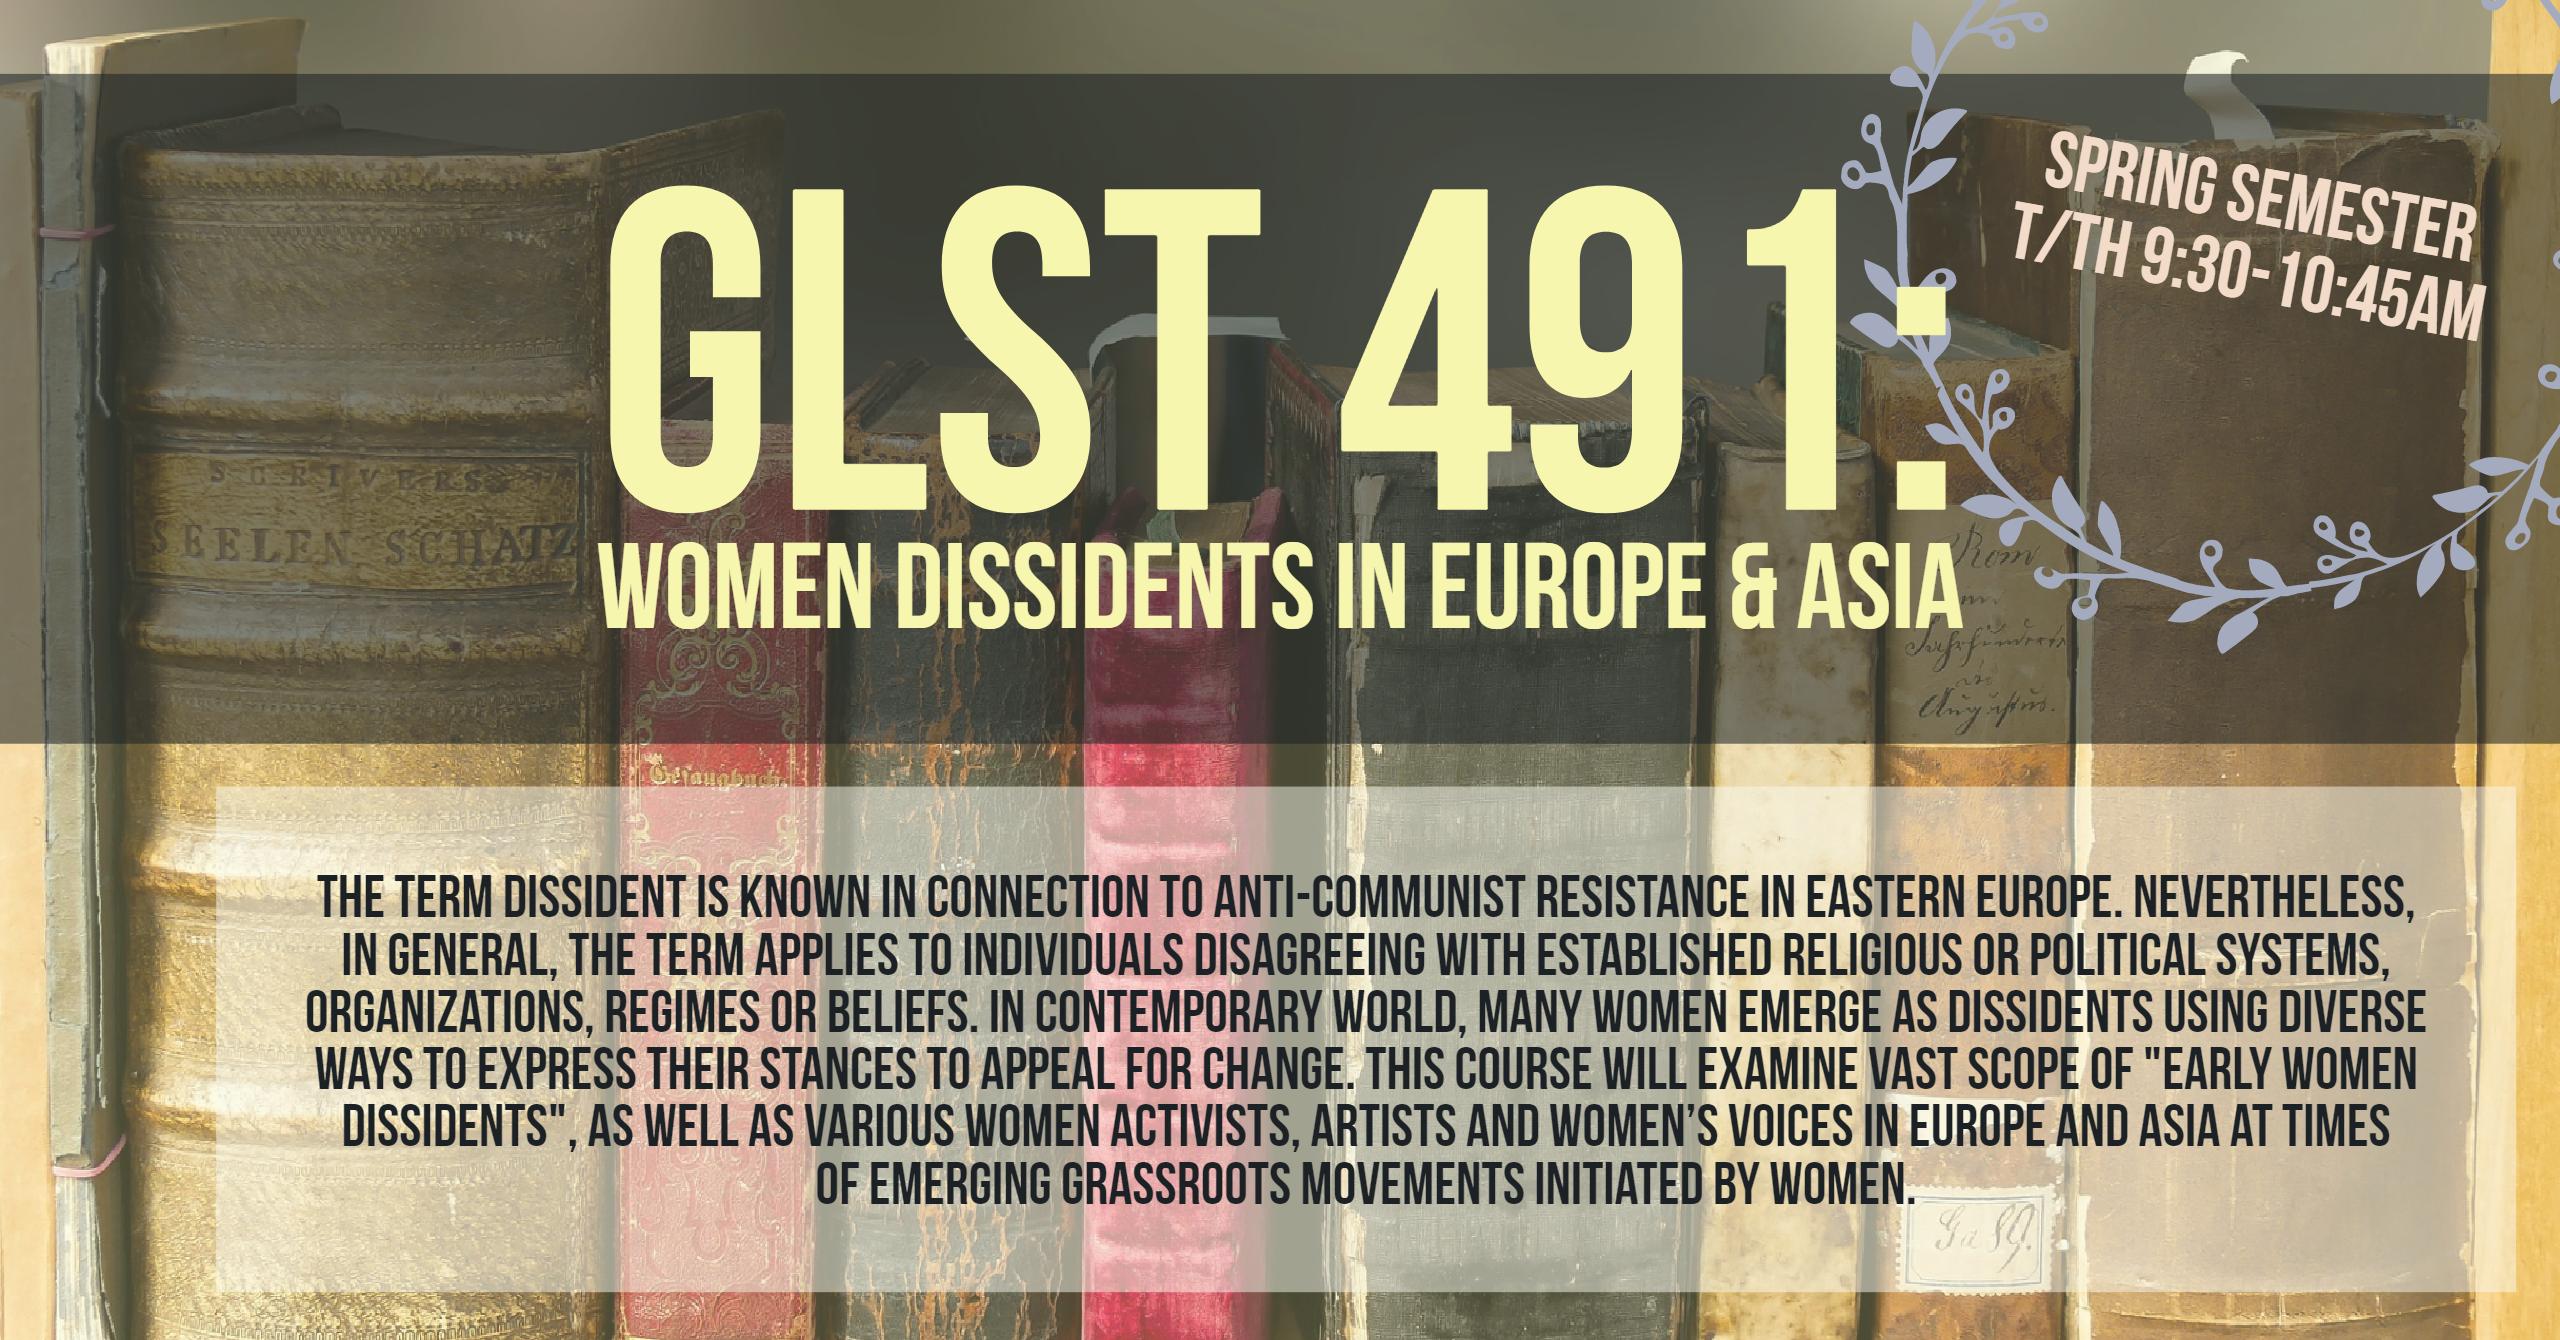 GLST 491: Women Dissidents in Europe & Asia